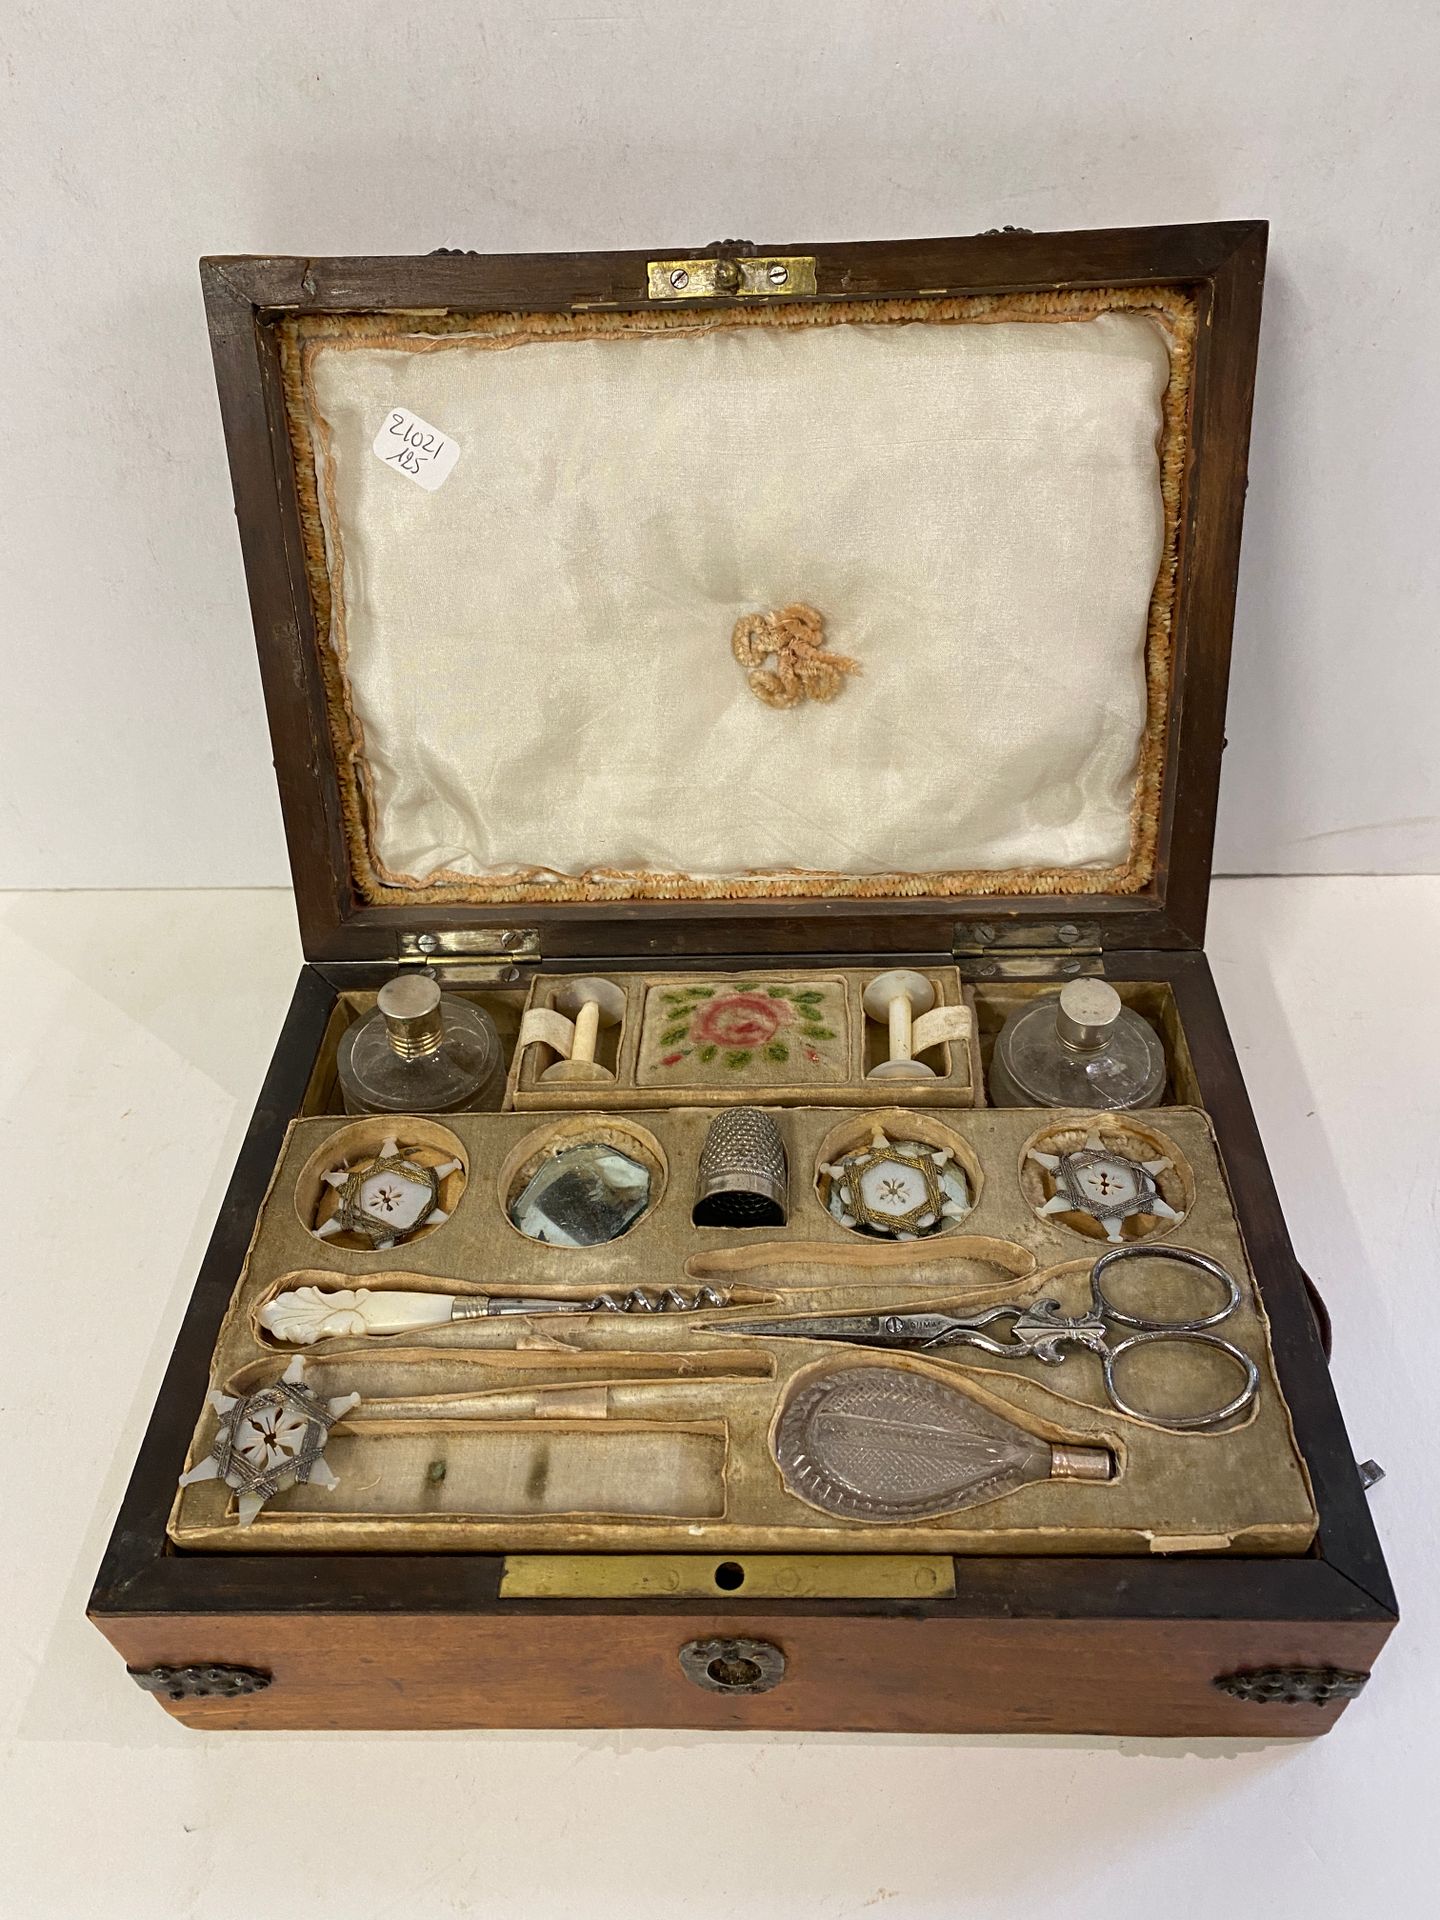 Null Veneer box containing a sewing kit

19th century

Misses

H : 9 - L : 21,5 &hellip;